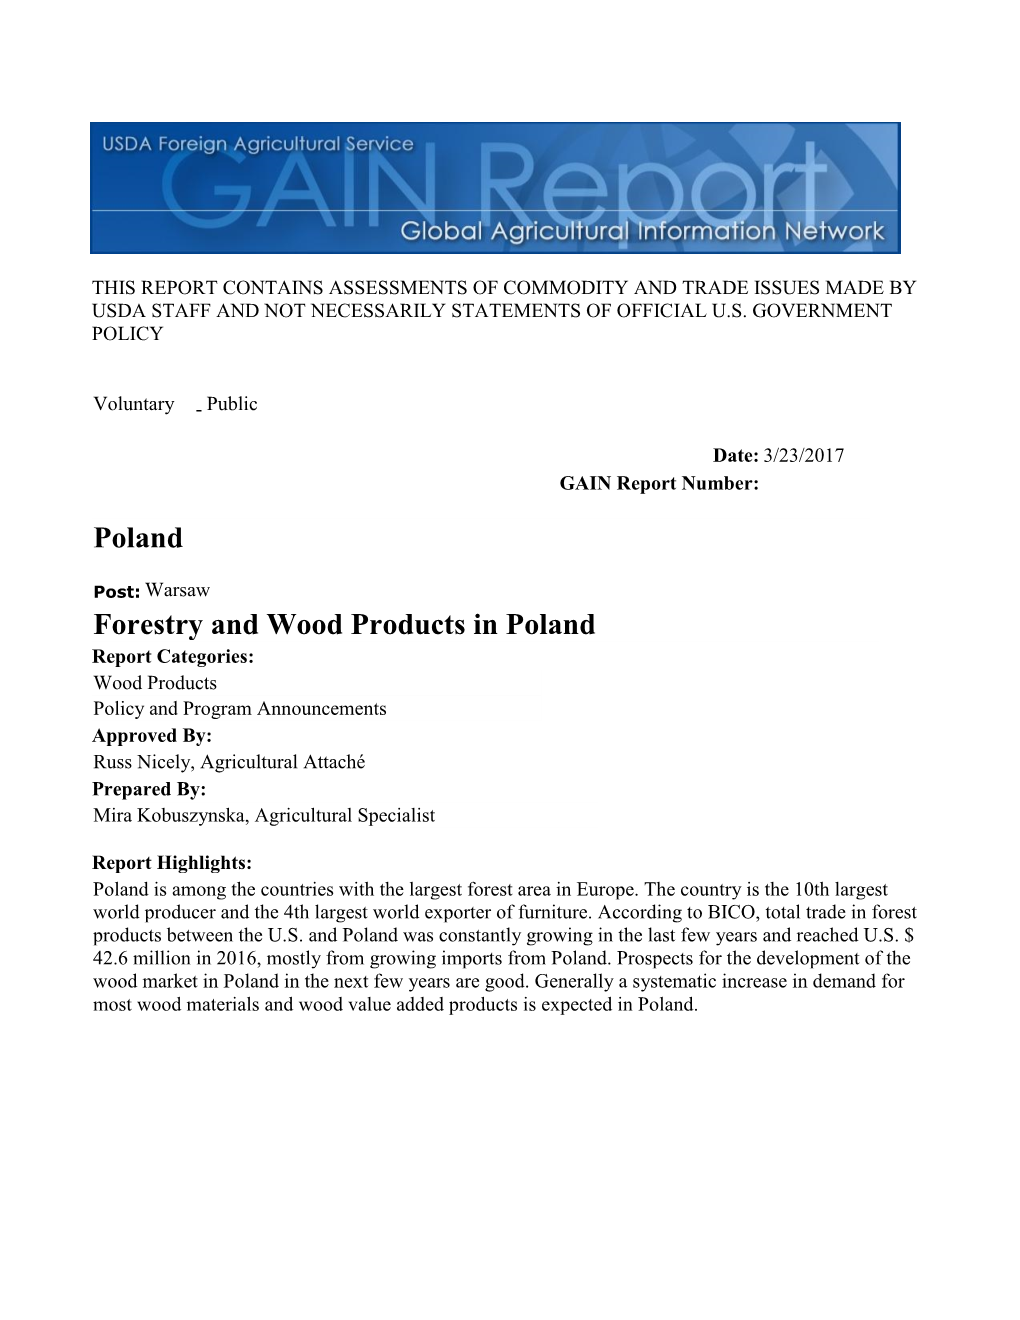 Forestry and Wood Products in Poland